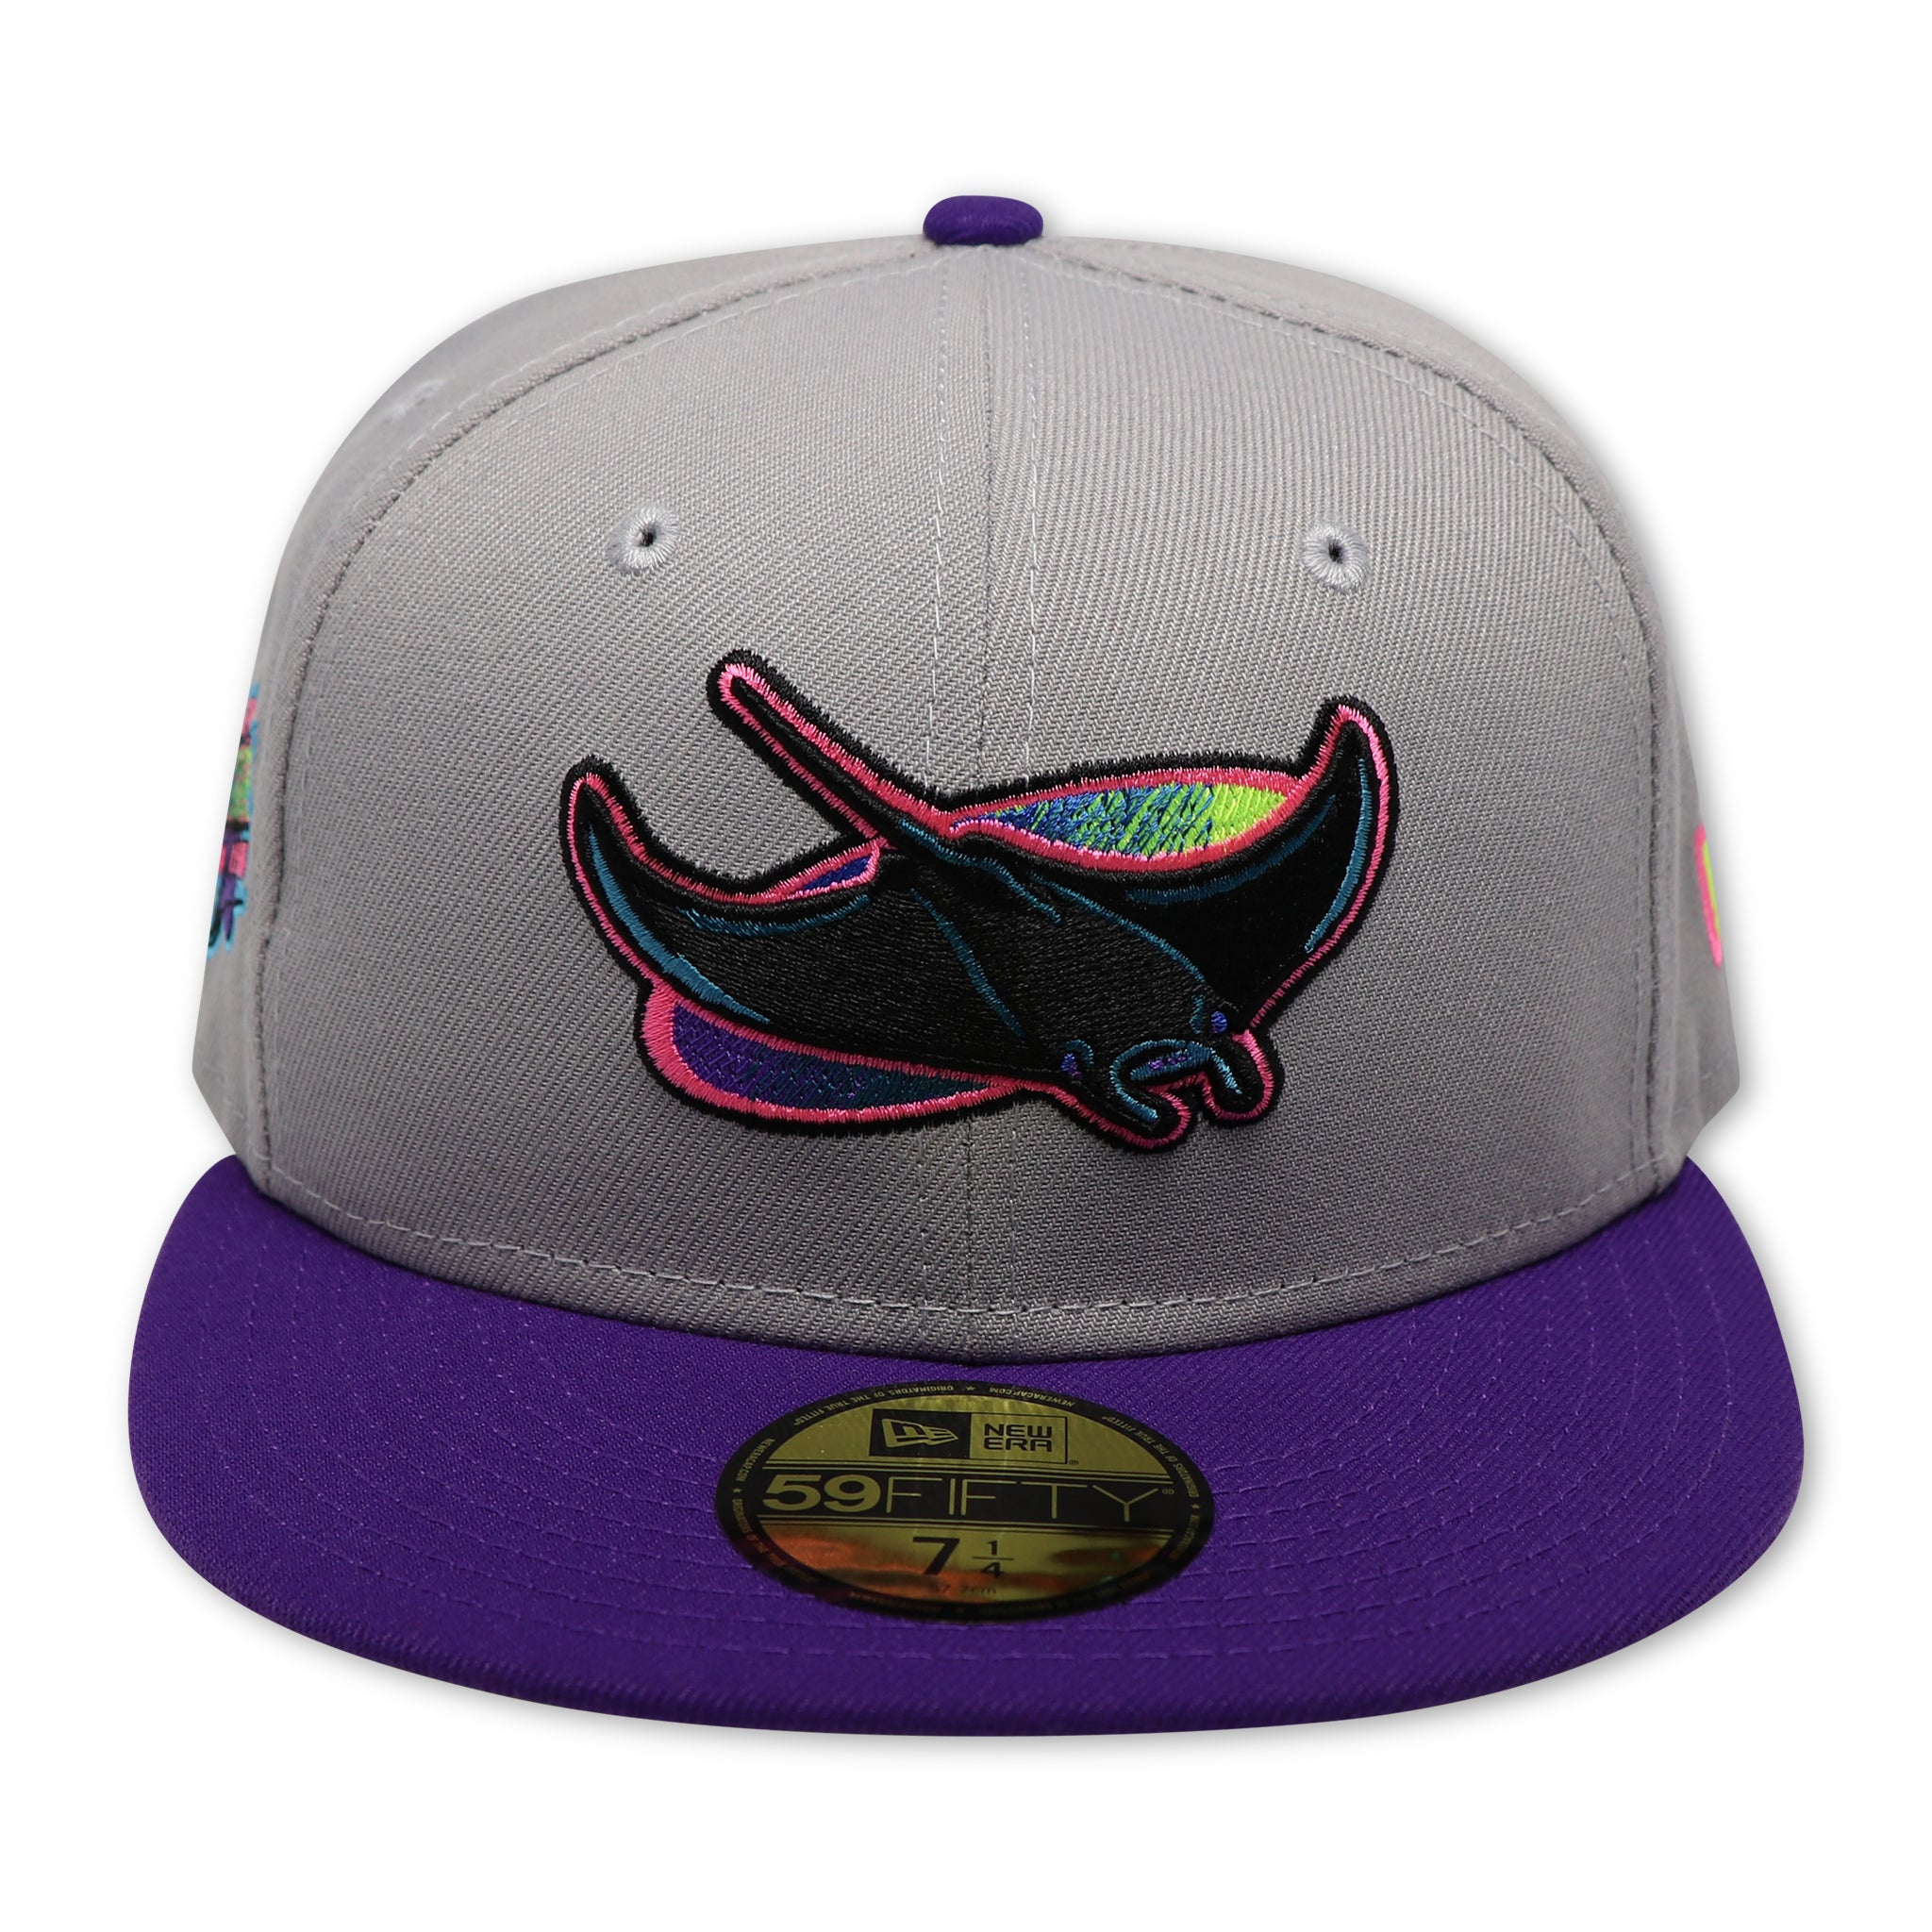 TAMPA BAY DEVIL RAYS (GREY) (1998 INAUGURAL SEASON) NEW ERA 59FIFTY FITTED (NEON BOTTOM)